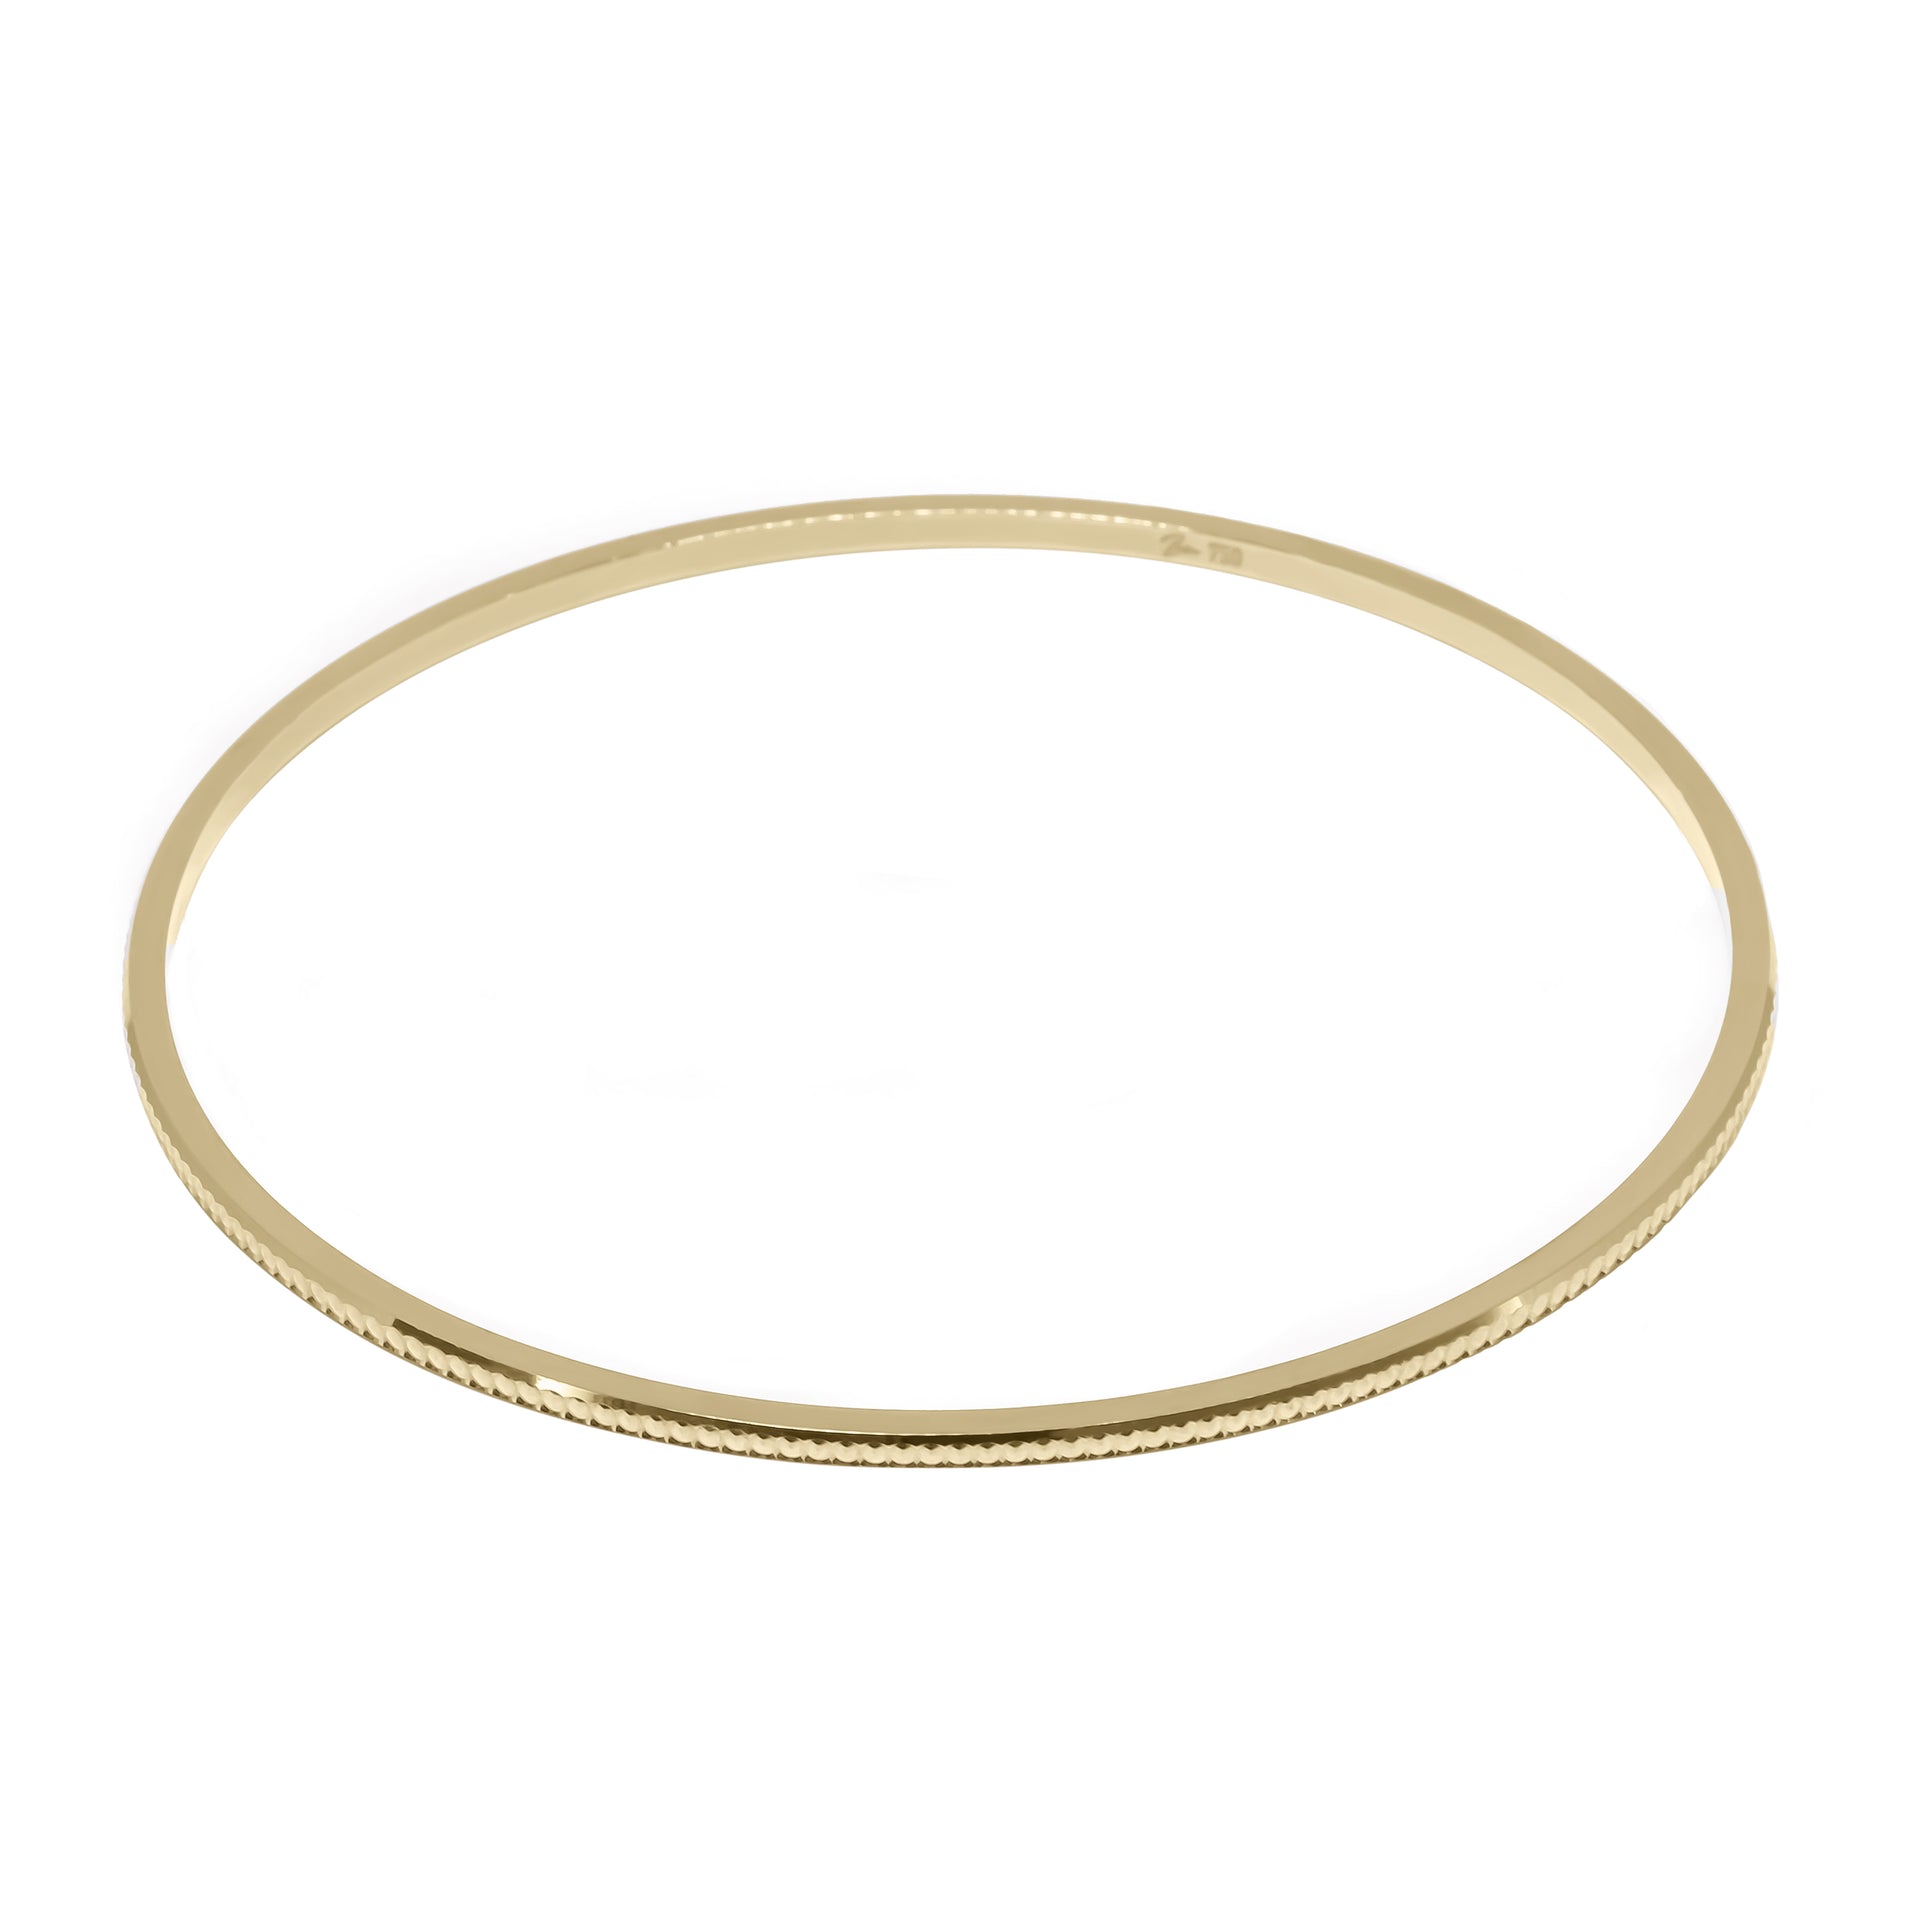 Bangle EARTH IS ROUND 2mm round embossed pattern yellow gold 18k 750